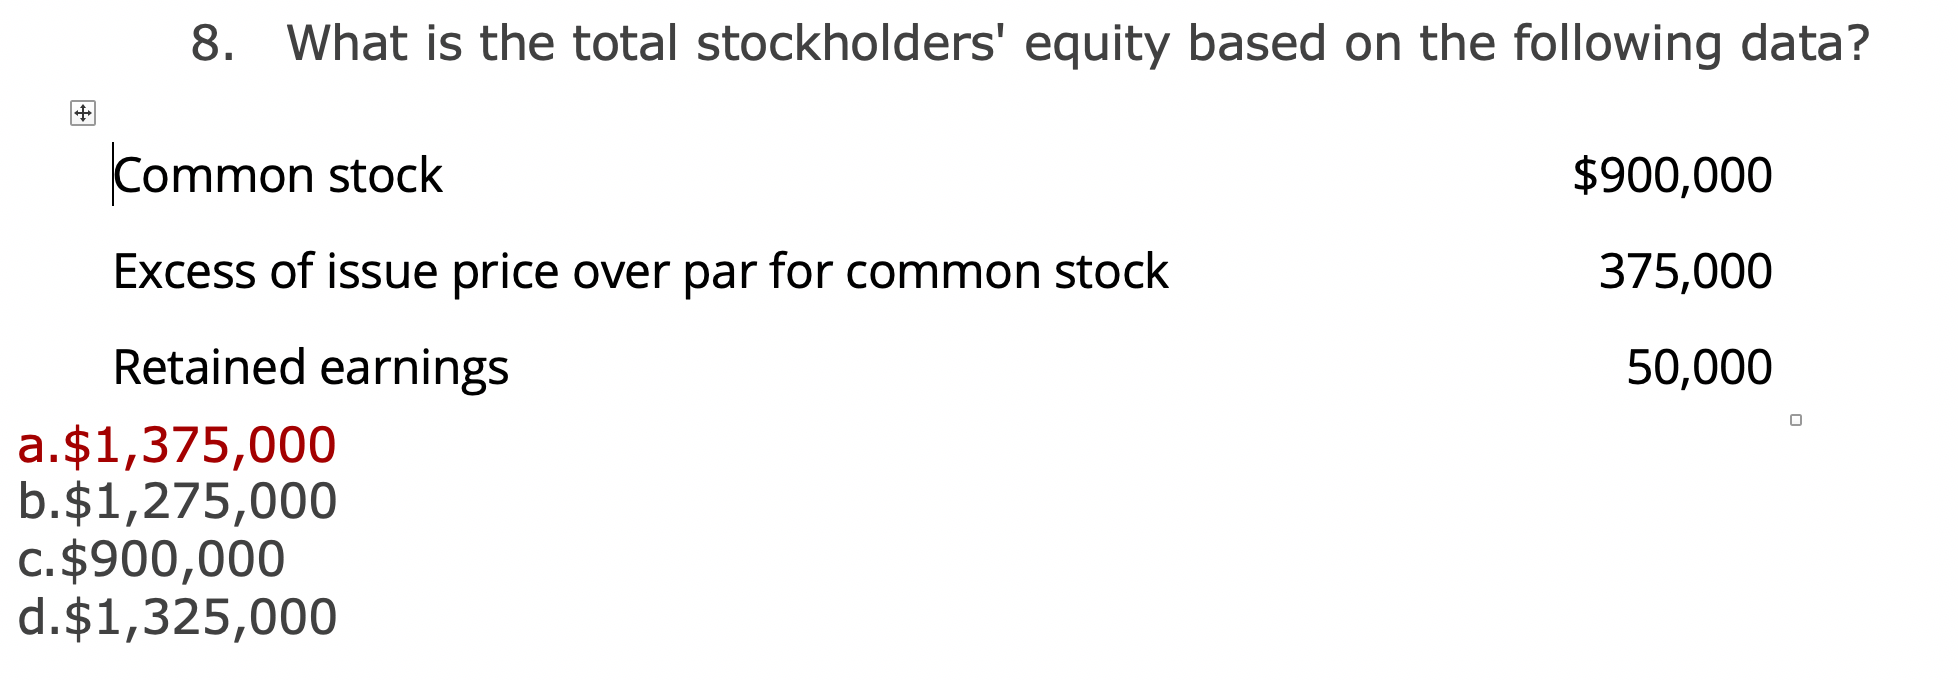 8. What is the total stockholders' equity based on the following data?
Common stock
$900,000
Excess of issue price over par for common stock
375,000
Retained earnings
50,000
a.$1,375,000
b.$1,275,000
c.$900,000
d.$1,325,000
